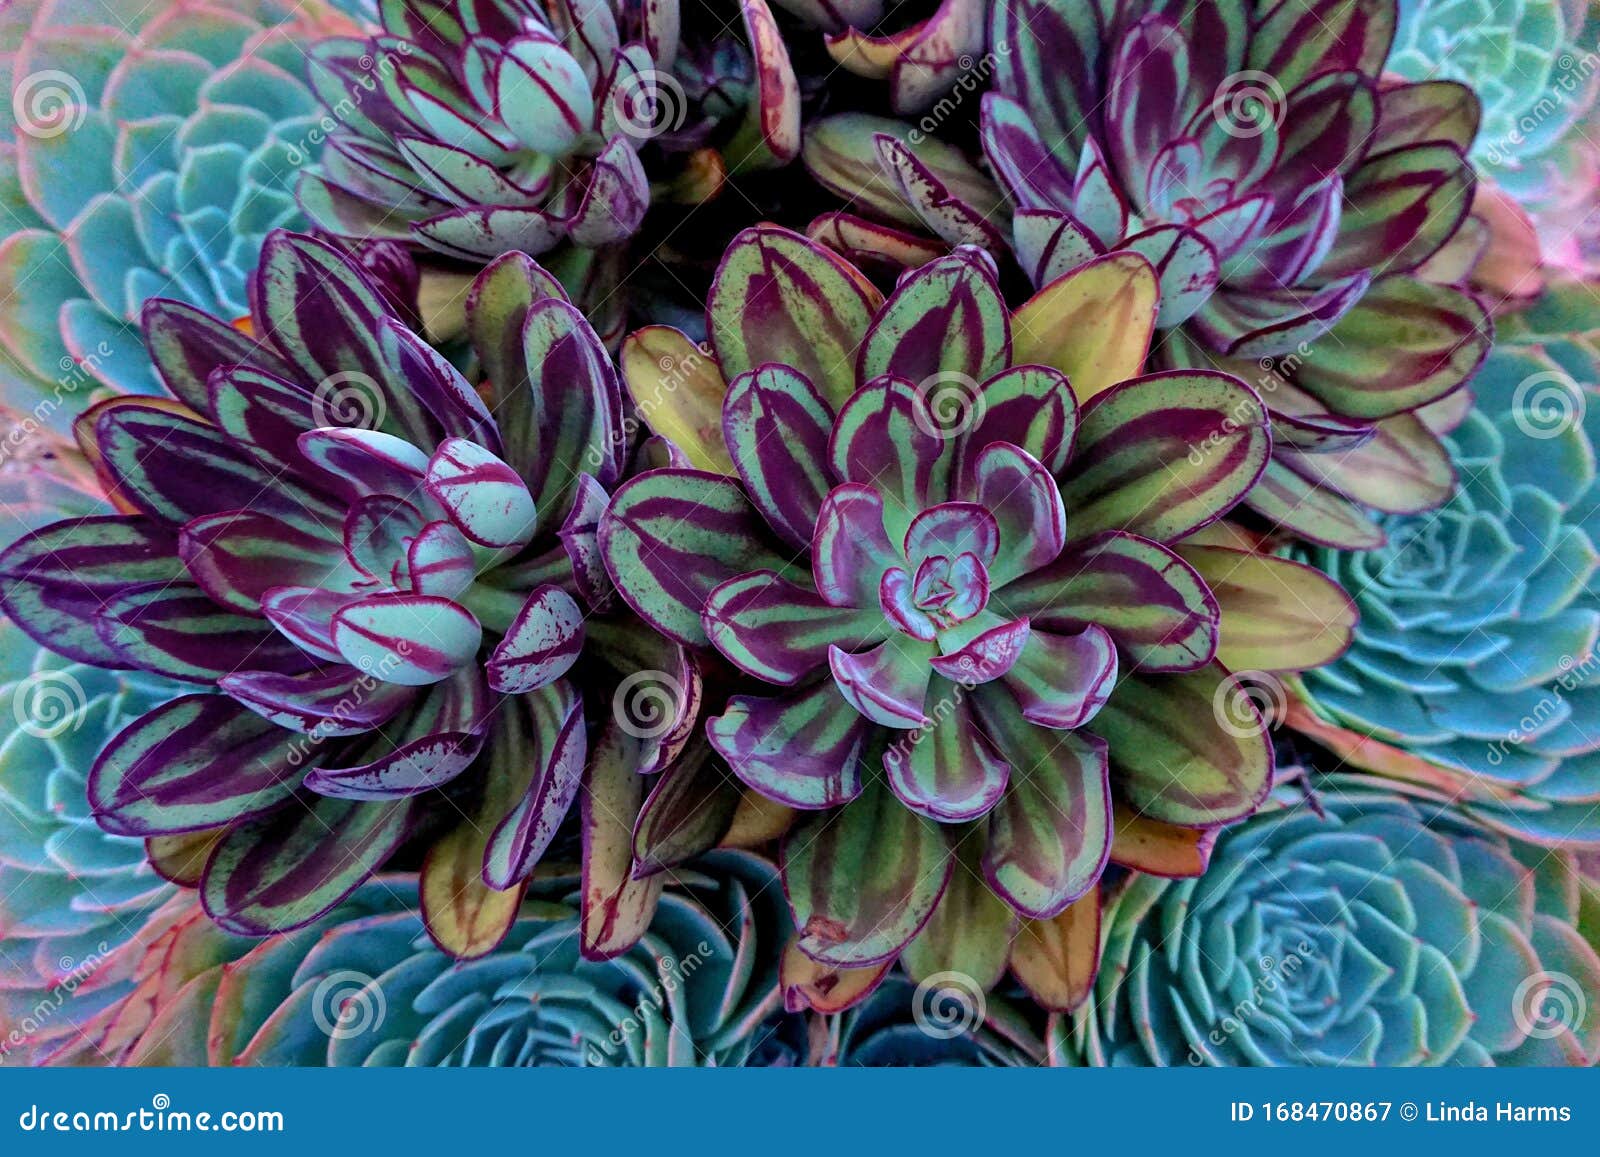 151 Painted Echeveria Photos Free Royalty Free Stock Photos From Dreamstime